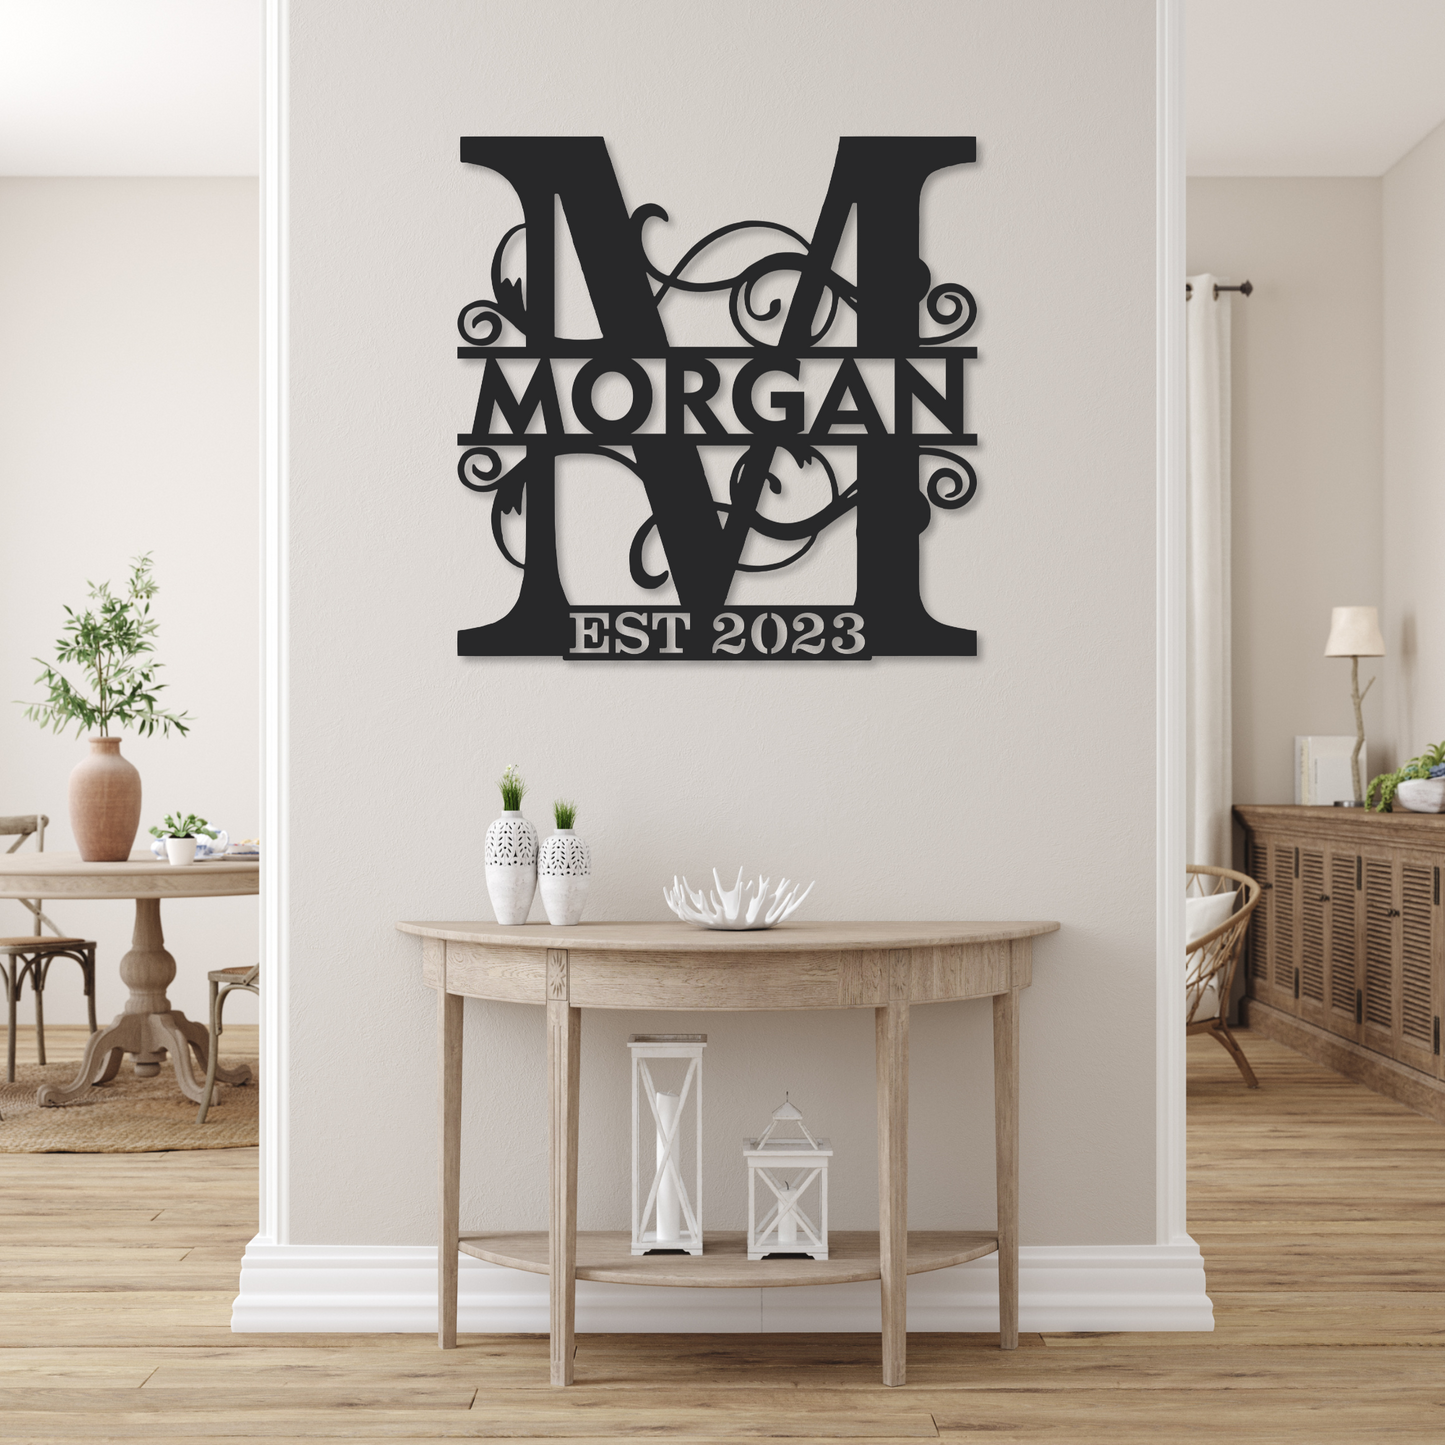 Family Name Monogram Sign A to Z with EST Date  | Metal Letter Monogram Sign